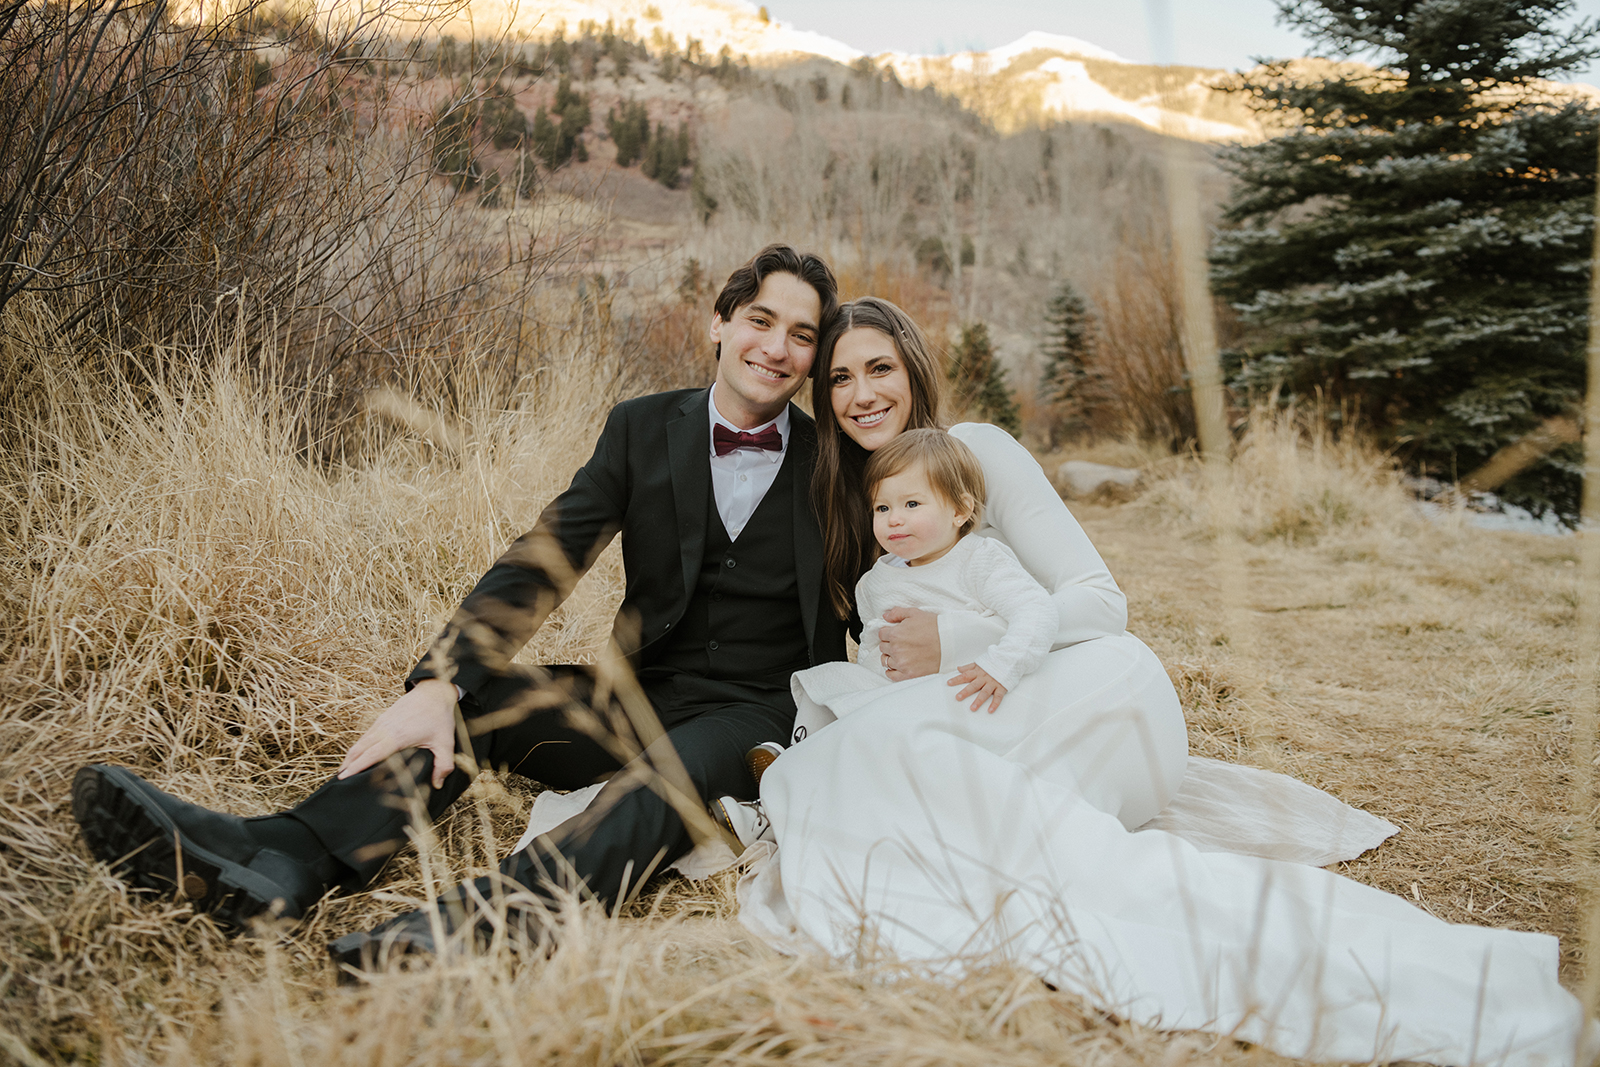 Family in wedding attire sitting on dried grass in the winter in Telluride